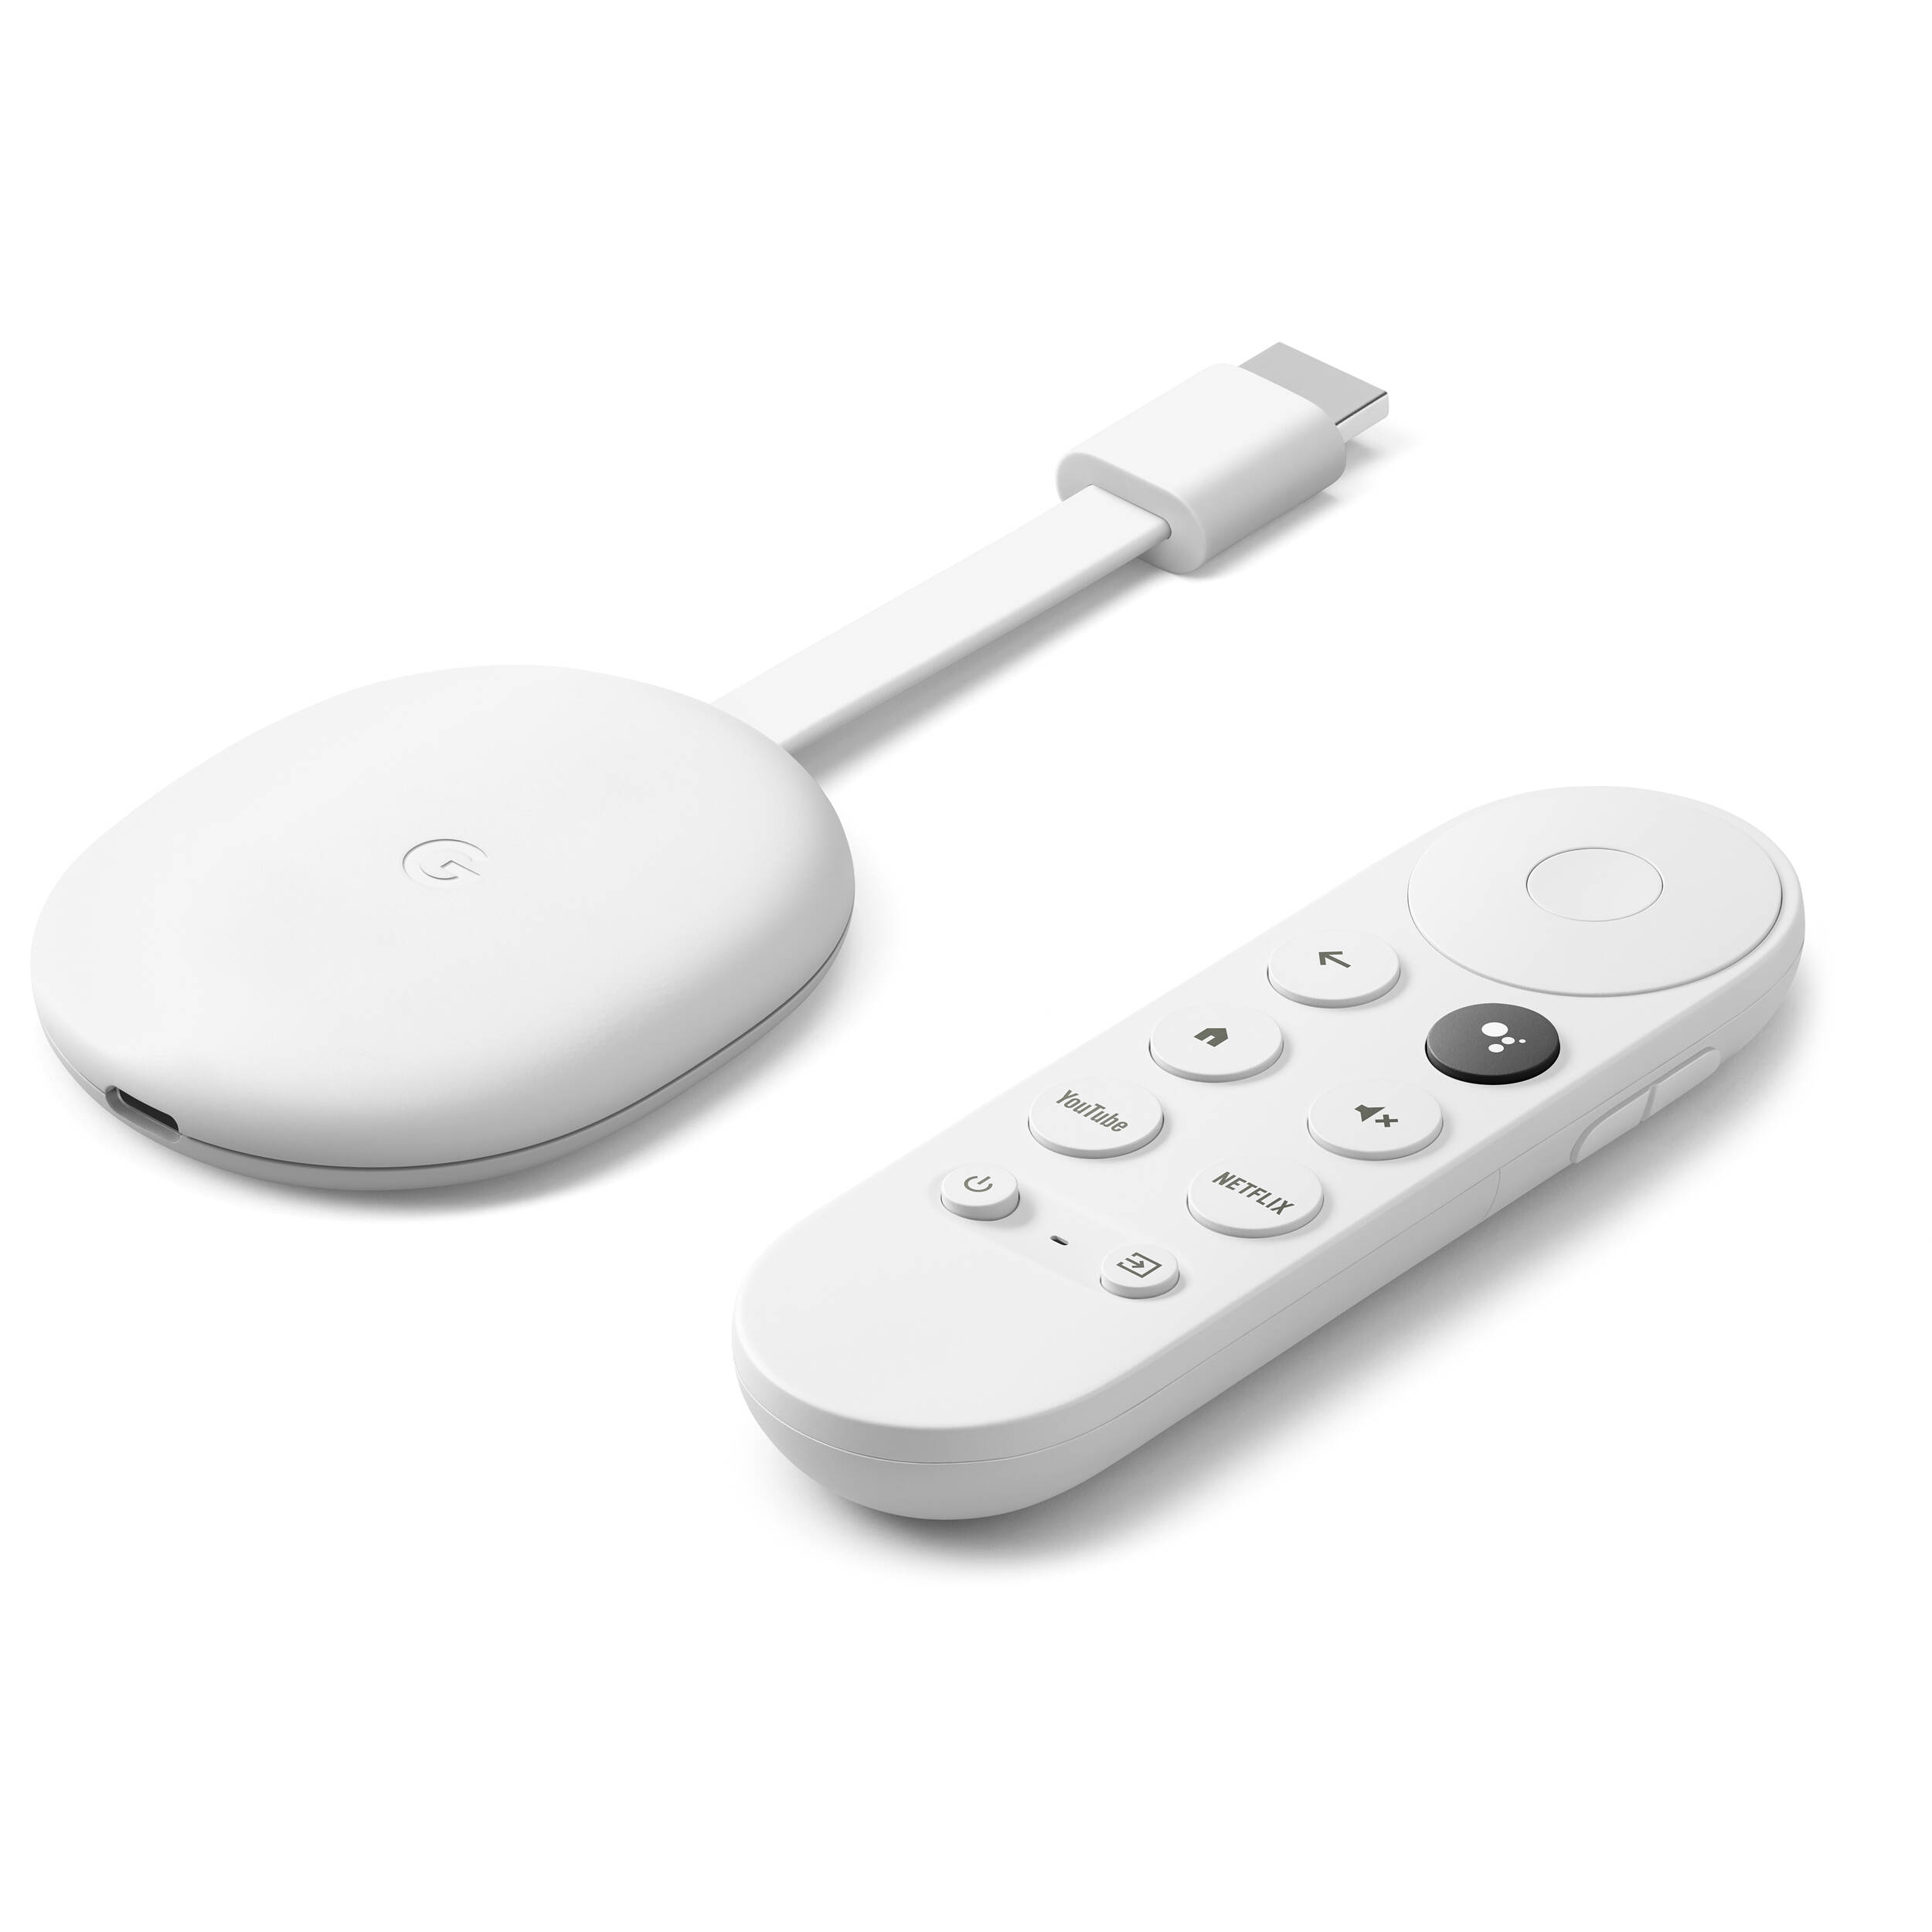 to fix not enough storage issue on Chromecast with TV - GChromecast Hub